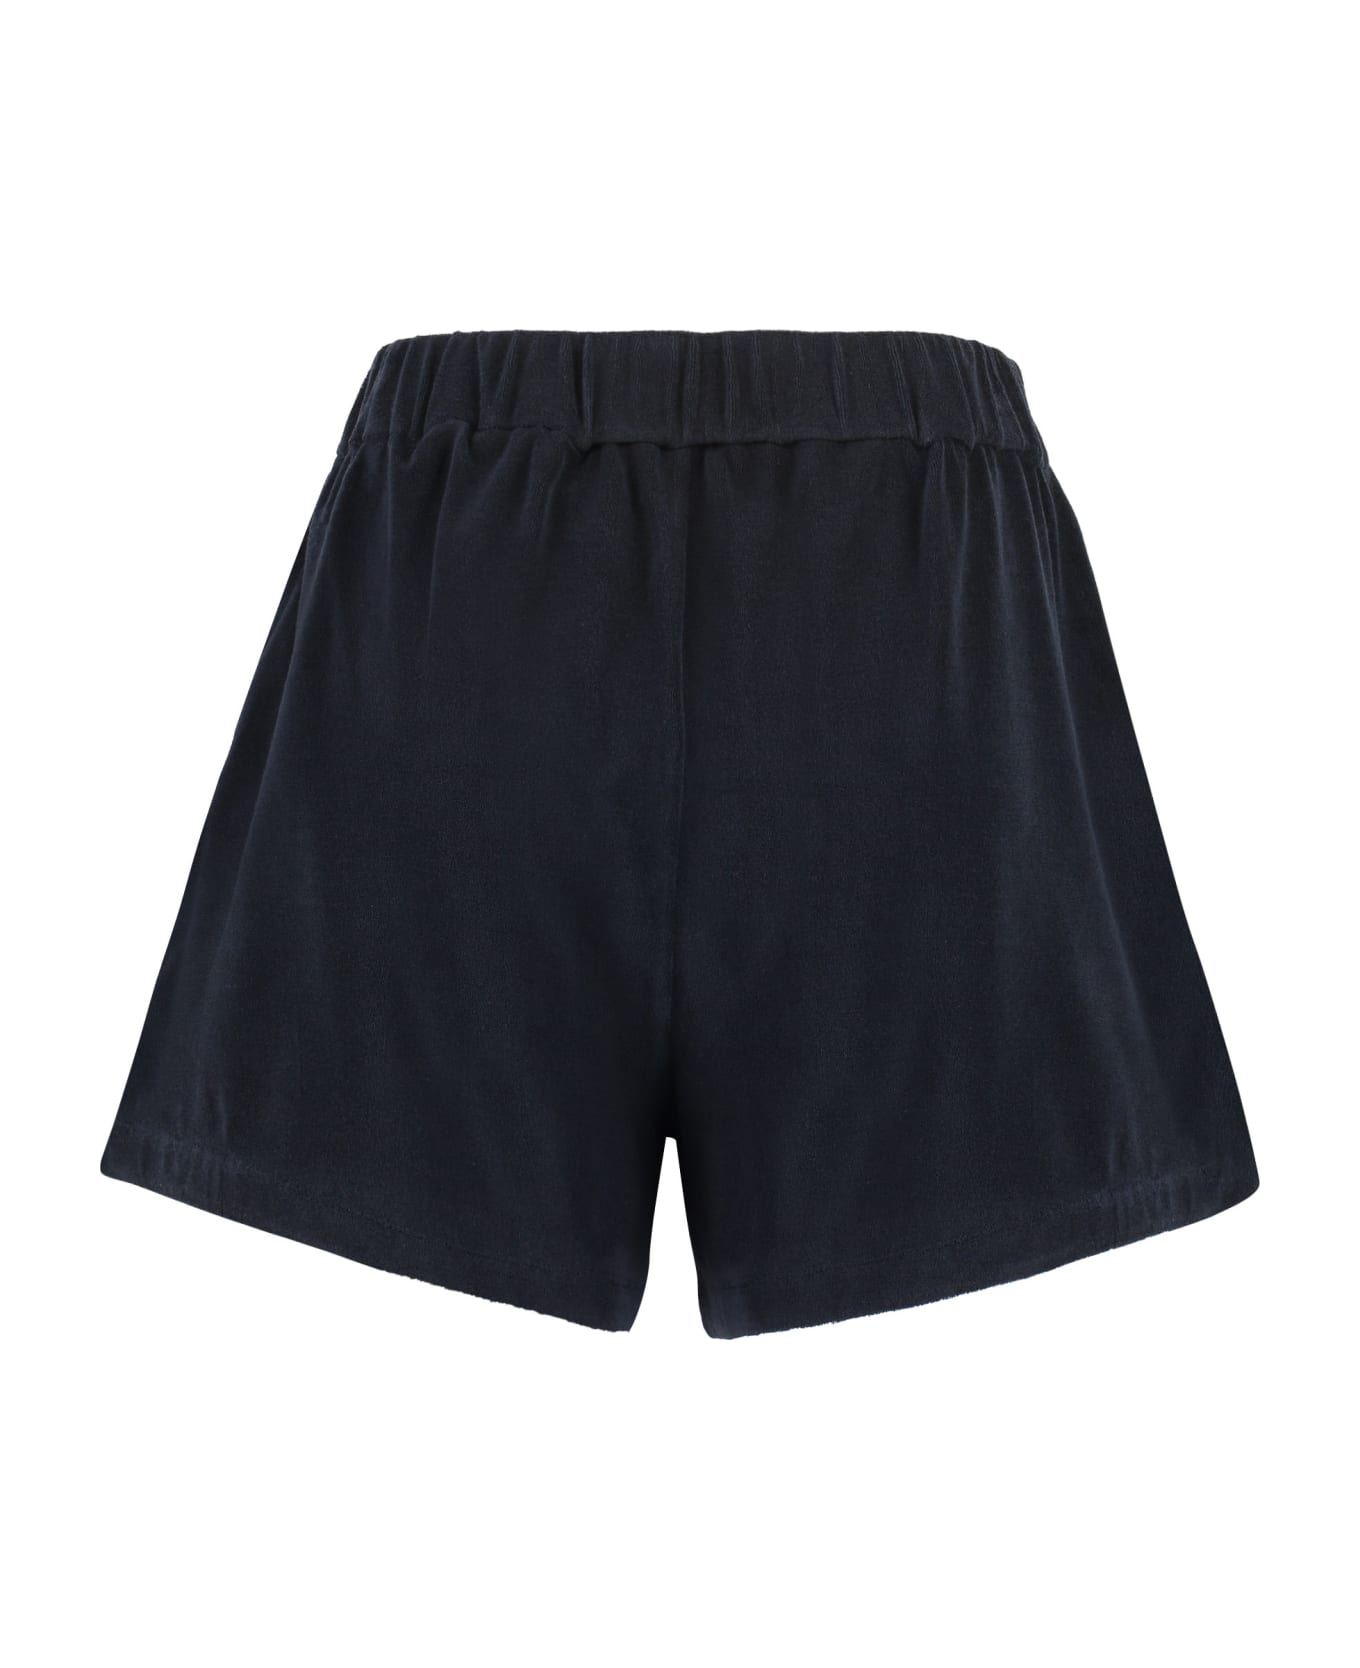 Moncler Terry Cloth Shorts - Blue ショートパンツ